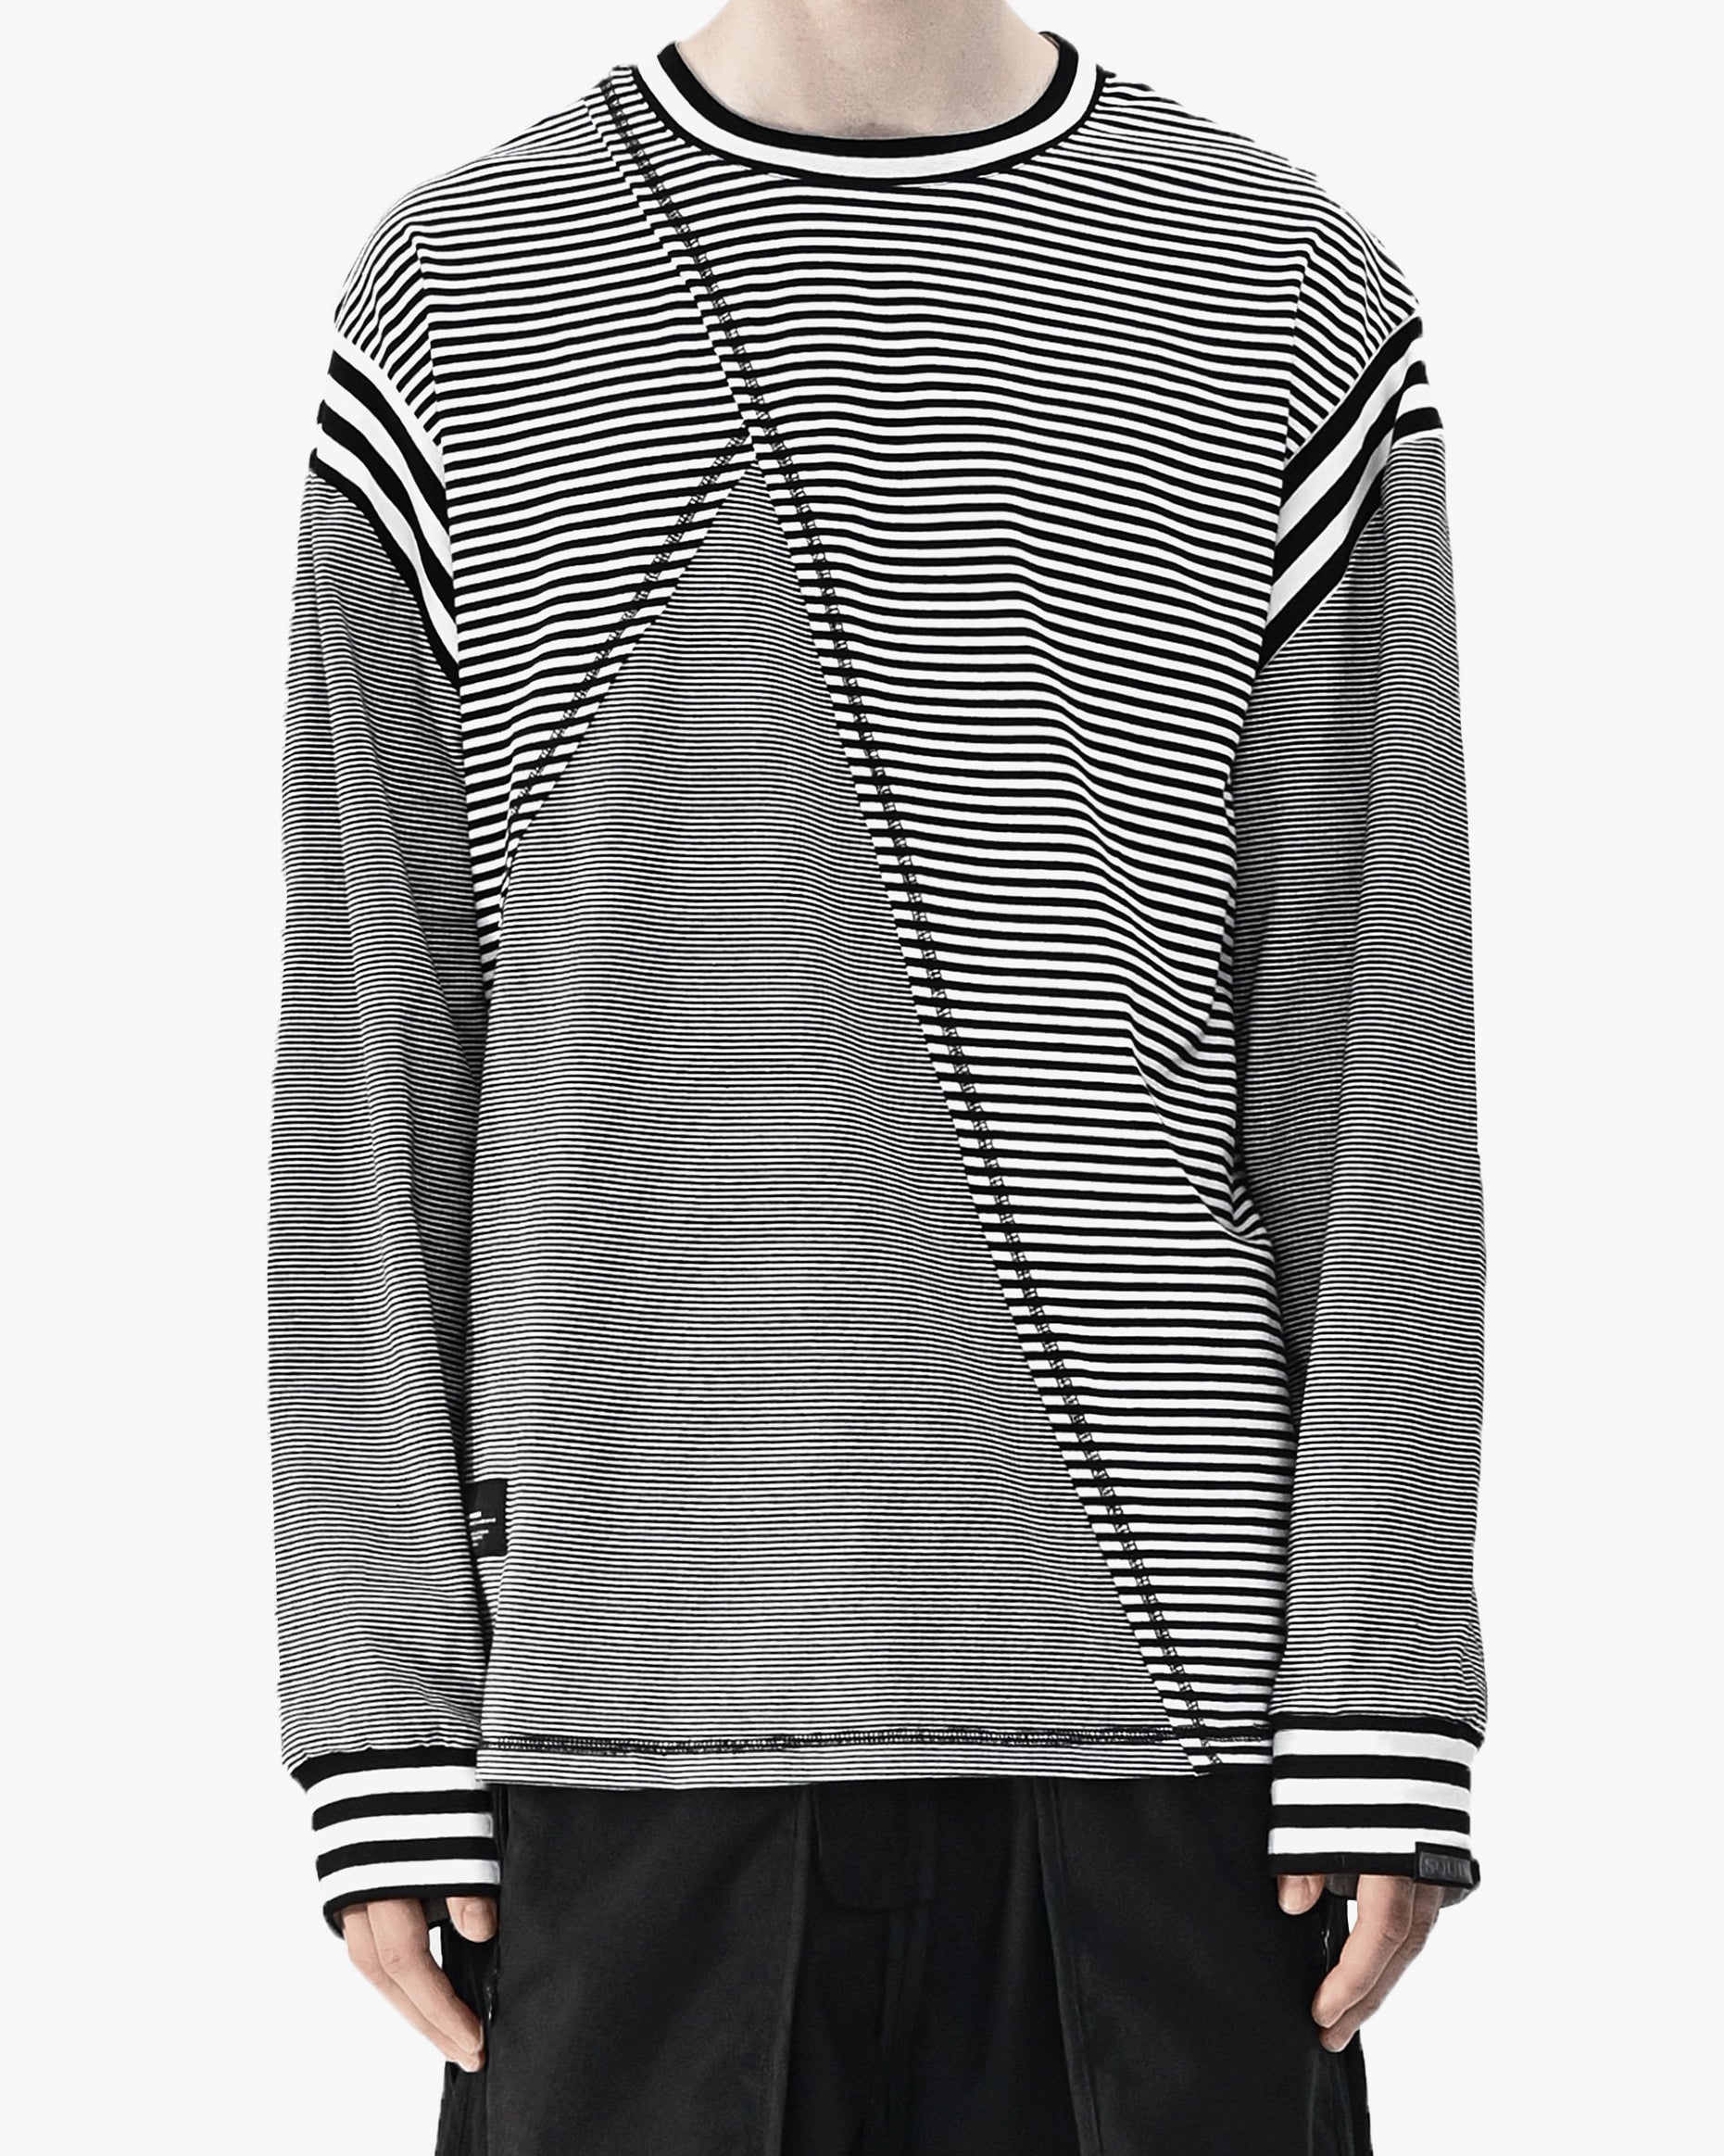 Deconstructed Striped Oversized Long Sleeve T-shirt